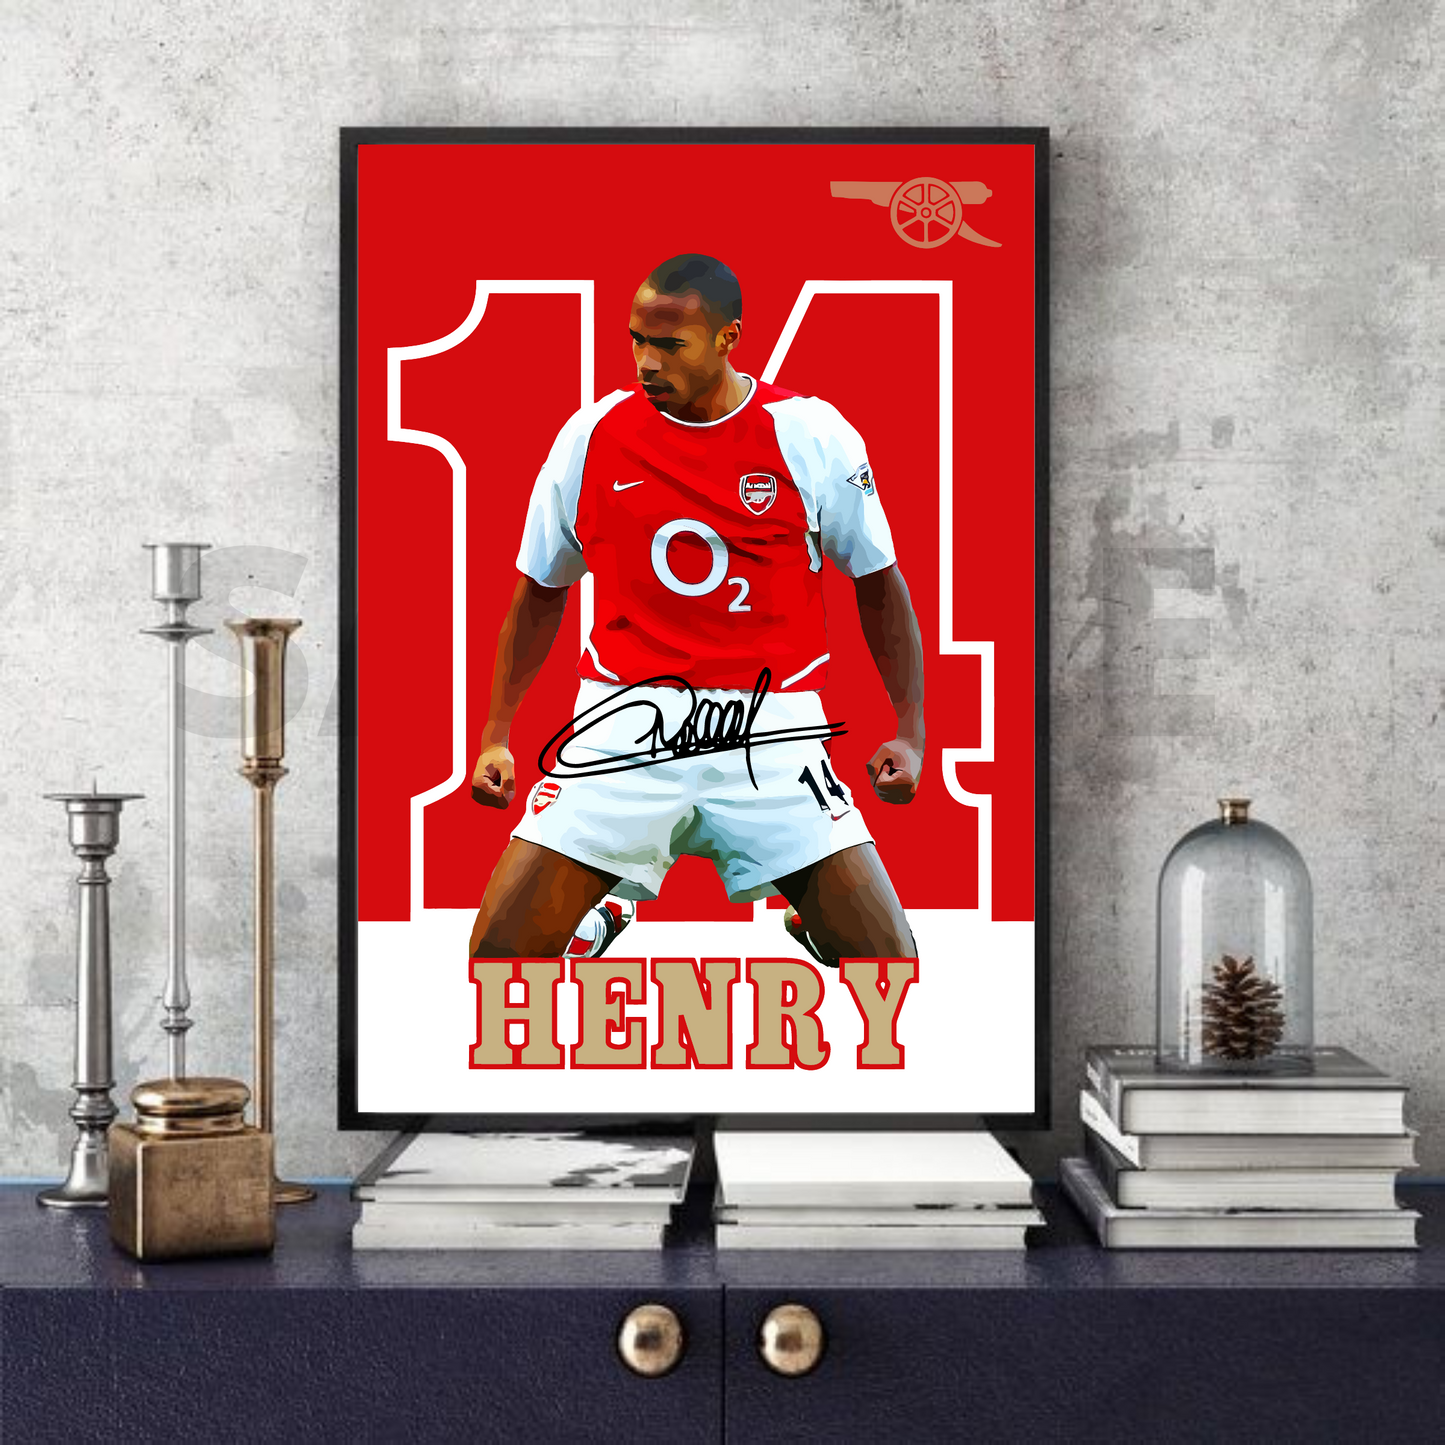 Thierry Henry (Arsenal) #71 - Football print/poster collectable/gift/memorabilia